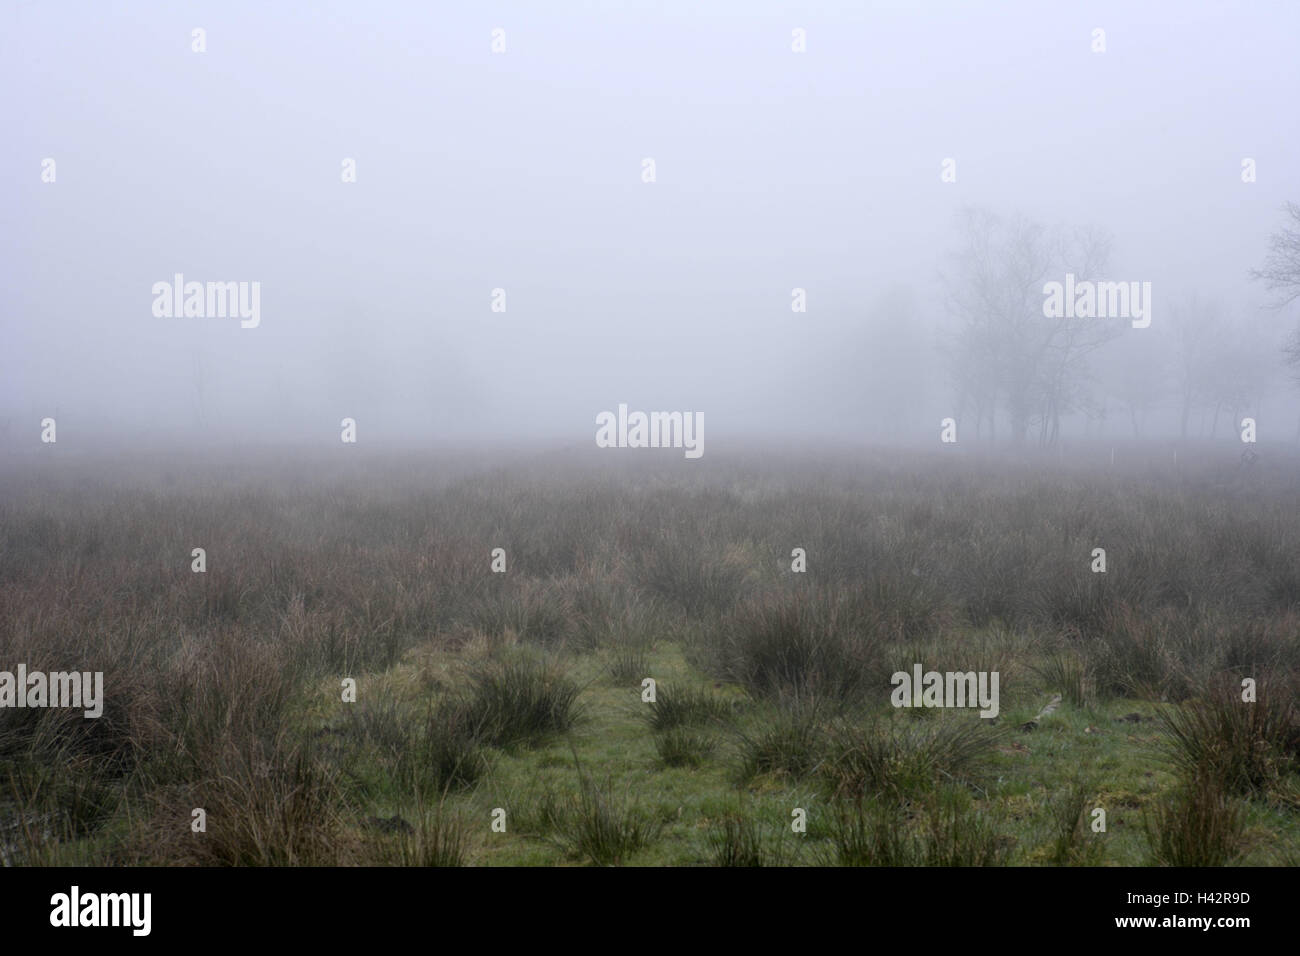 Germany, Lower Saxony, Stoteler Moore, trees, fog, Stotel, Stotelermoor, Moore, marsh, marshy landscape, scenery, nature, nature reserve, wetland, mood, grass, haze, morning, rest, silence, opaquely, riddle, mysticism, fog patches, hazy, mysteriously, nobody, Stock Photo